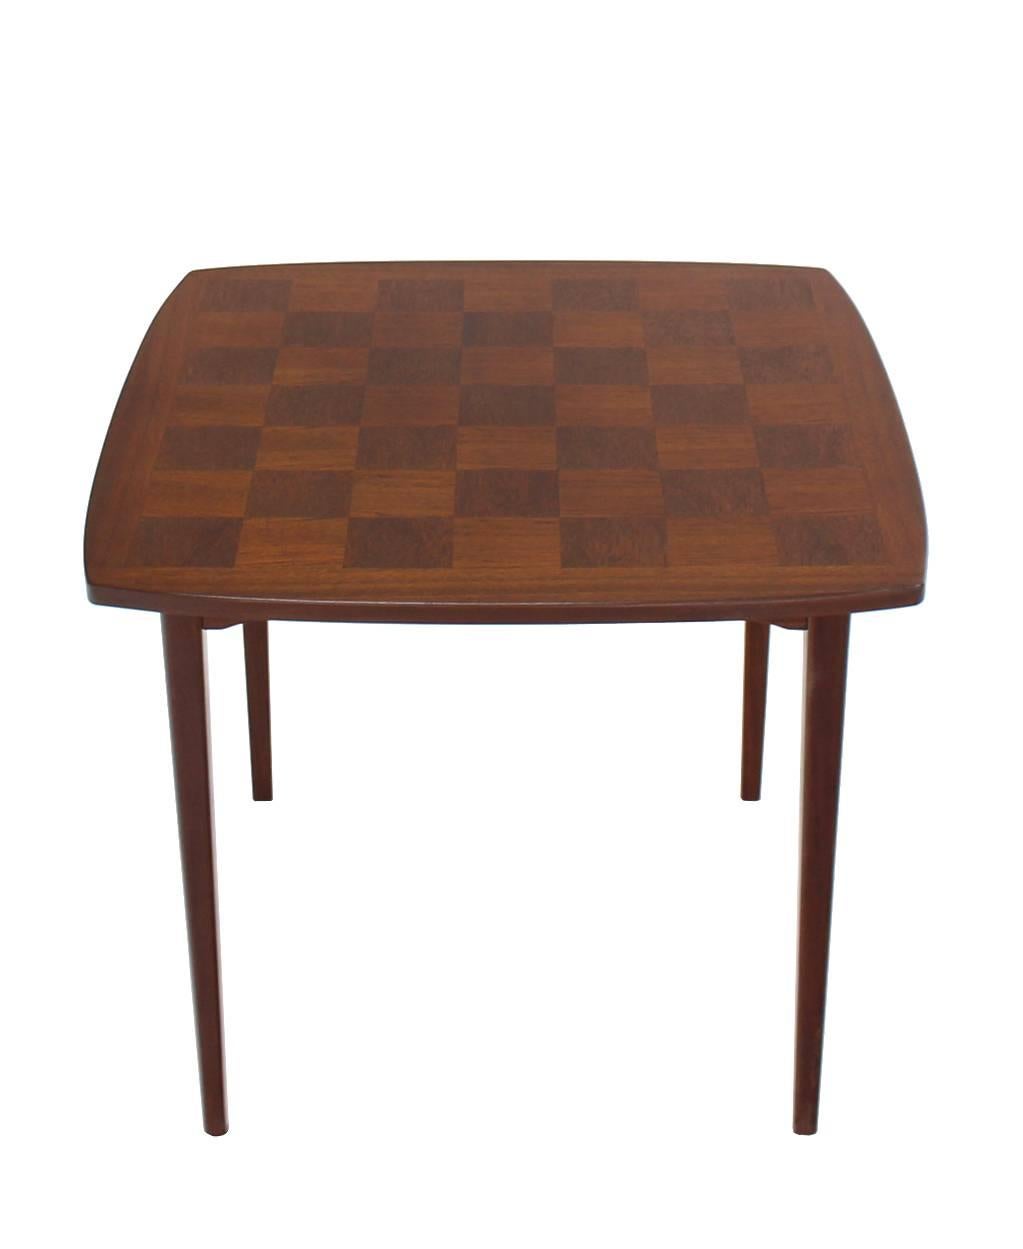 American Danish Mid-Century Modern Parquetry Top Game Table